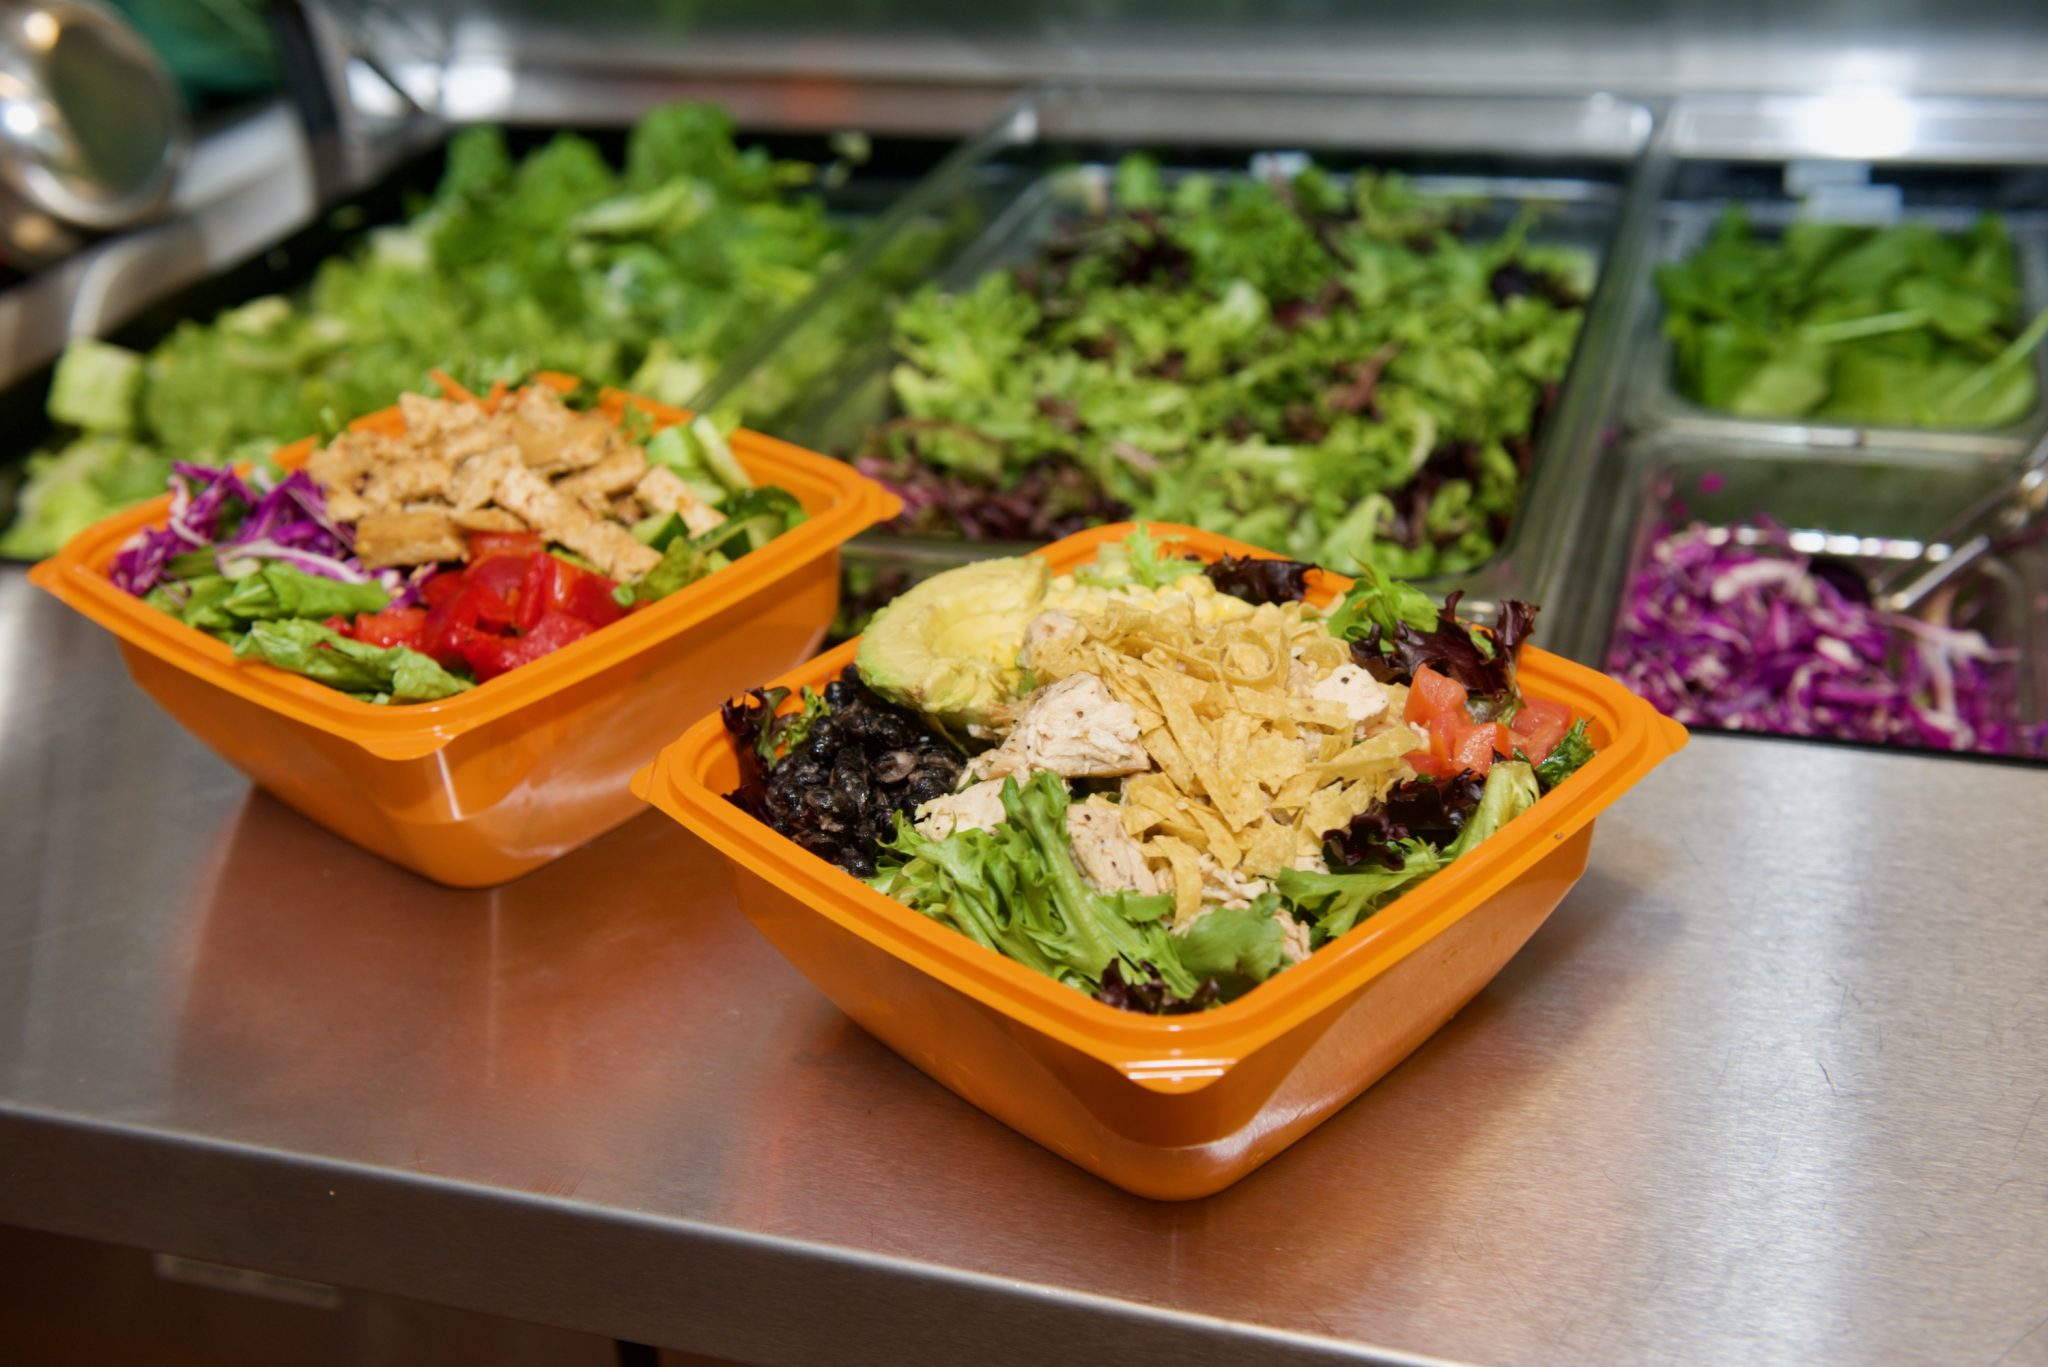 Salad and Go keeps the salads coming with new drive-thru in